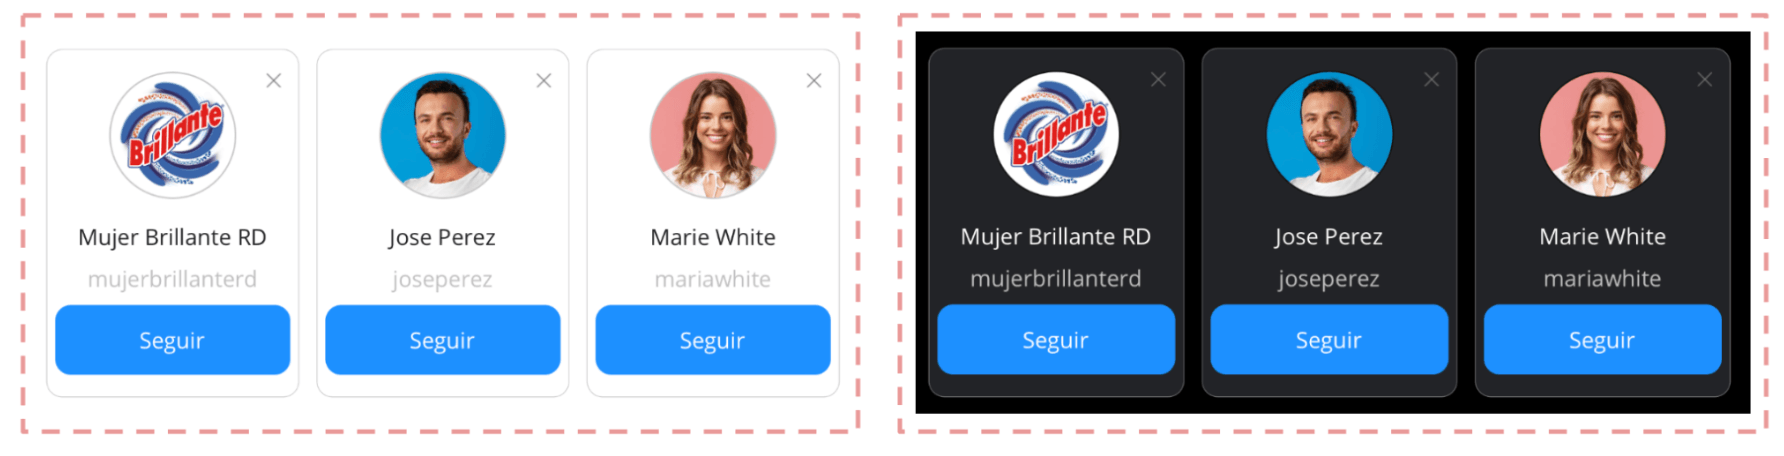 Three recommended cards with profile image, name, handle, and button. Light mode and dark mode both shown.